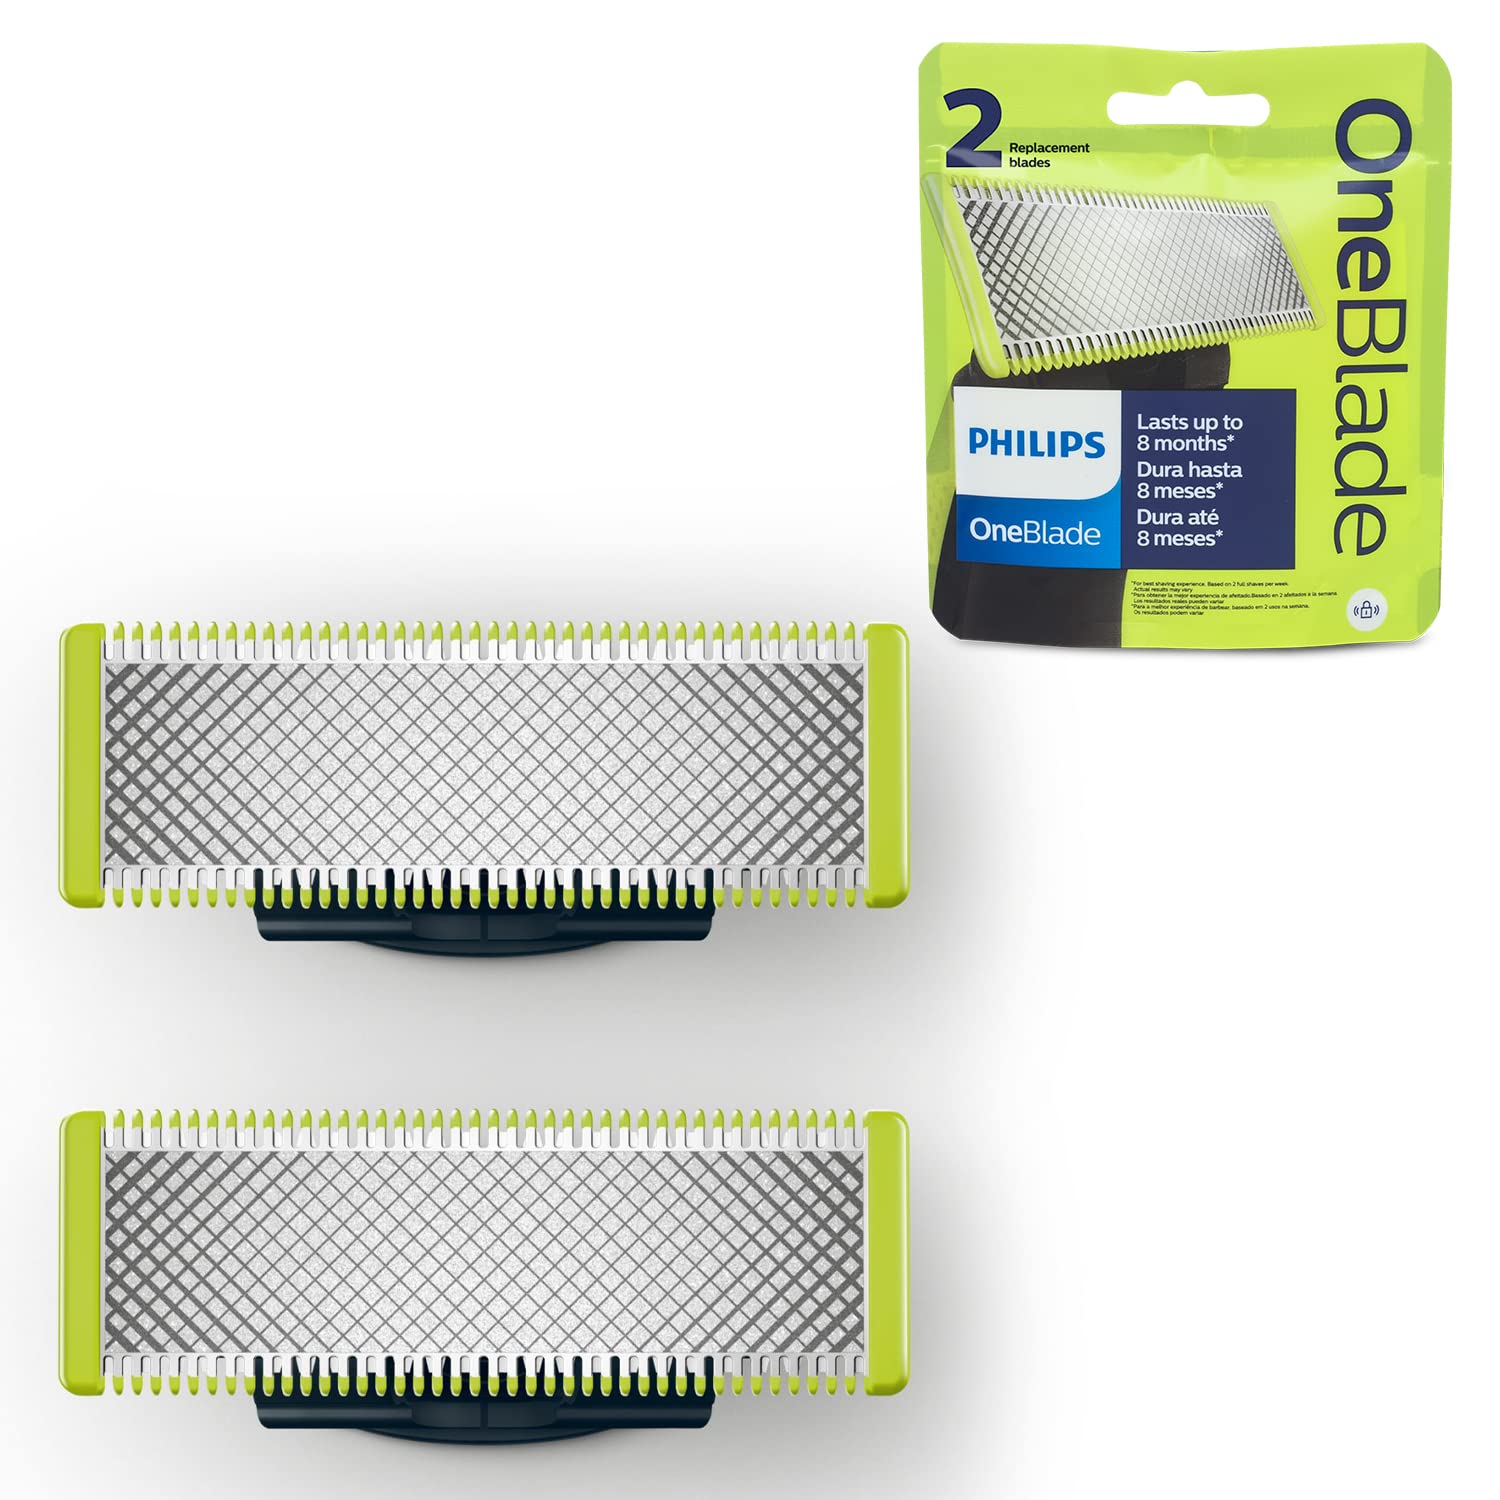 Philips OneBlade 2 replacement electric shaver blades and